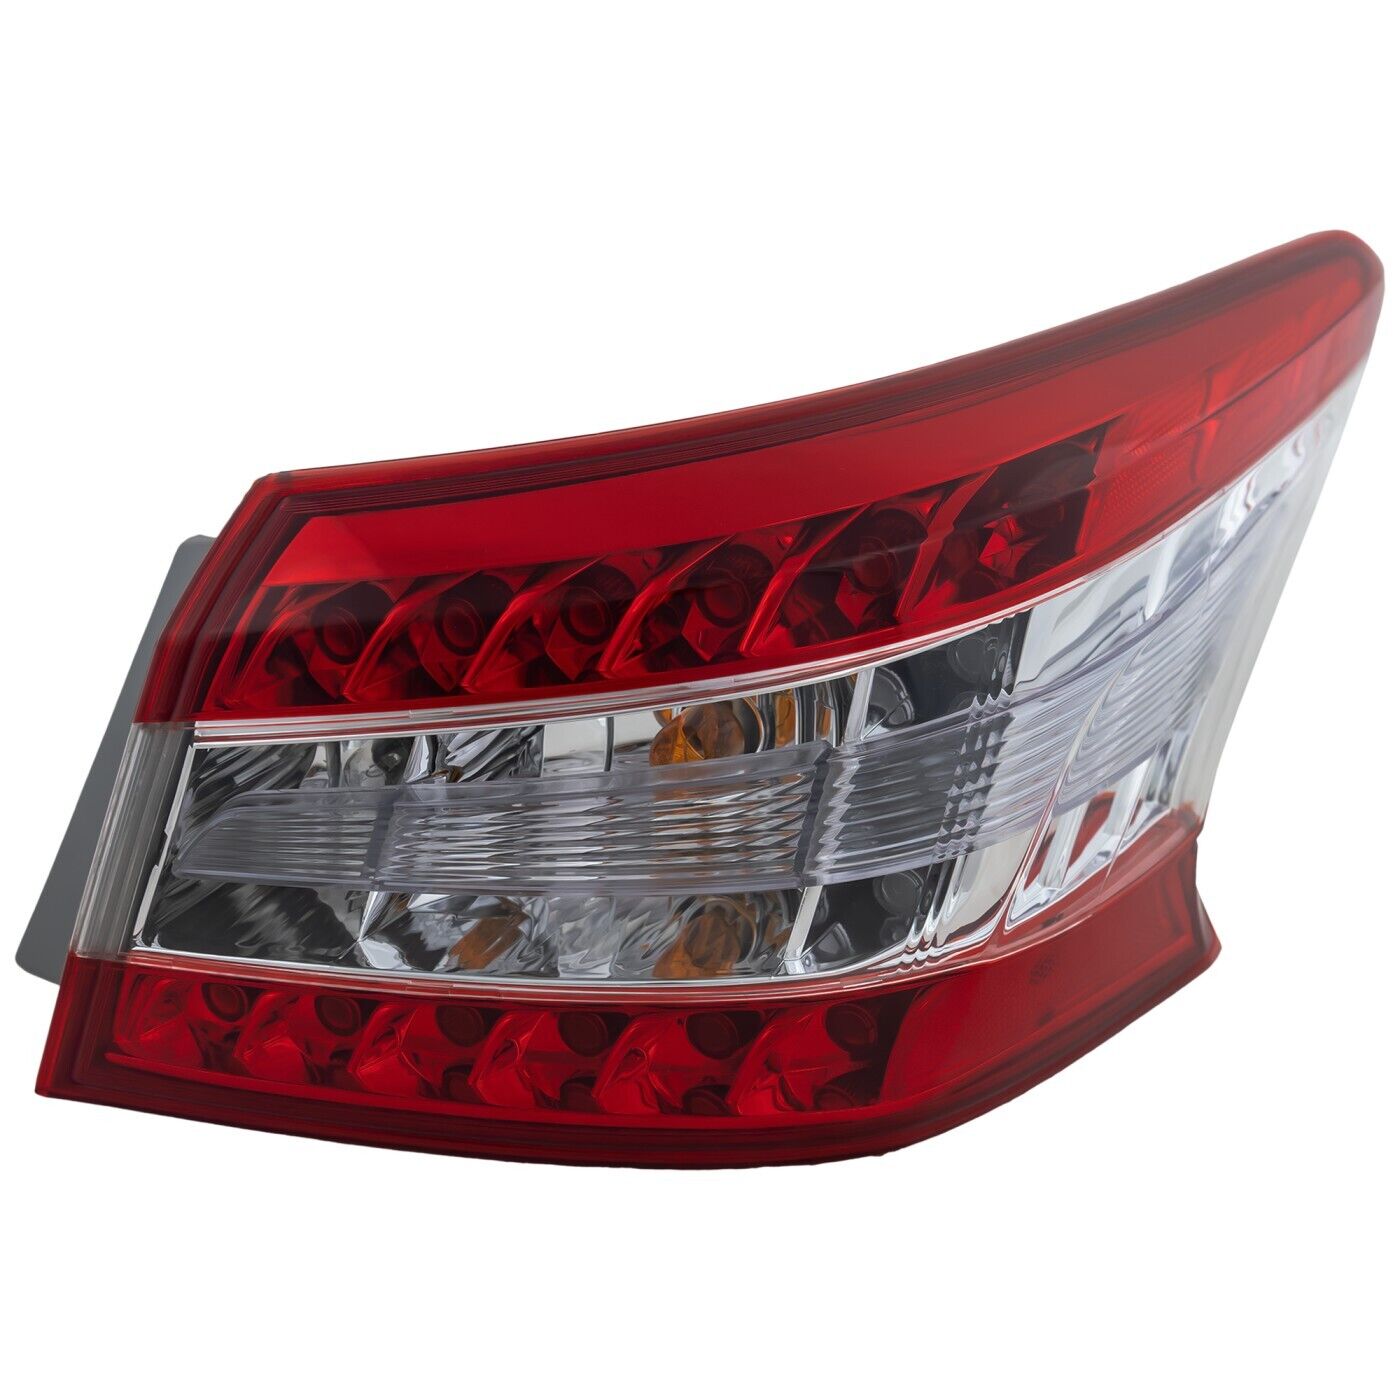 Tail Light Lamp Assembly For 13-15 Nissan Sentra Passenger Outer Mounts On Body